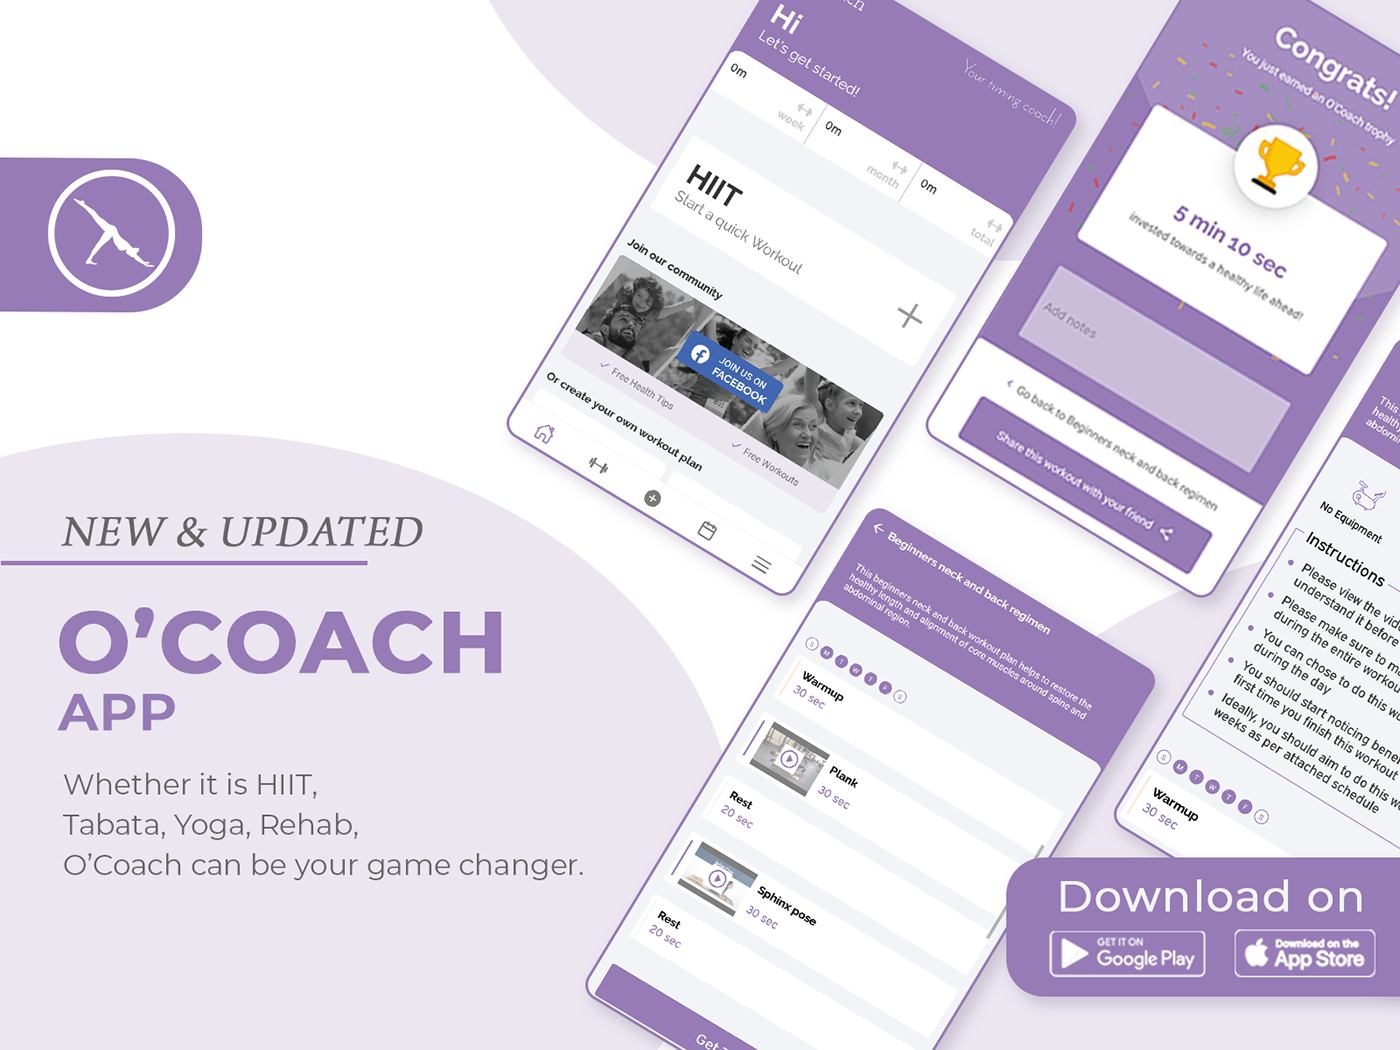 Get healthy by planing and executing efficient workouts with the help of O'Coach app.